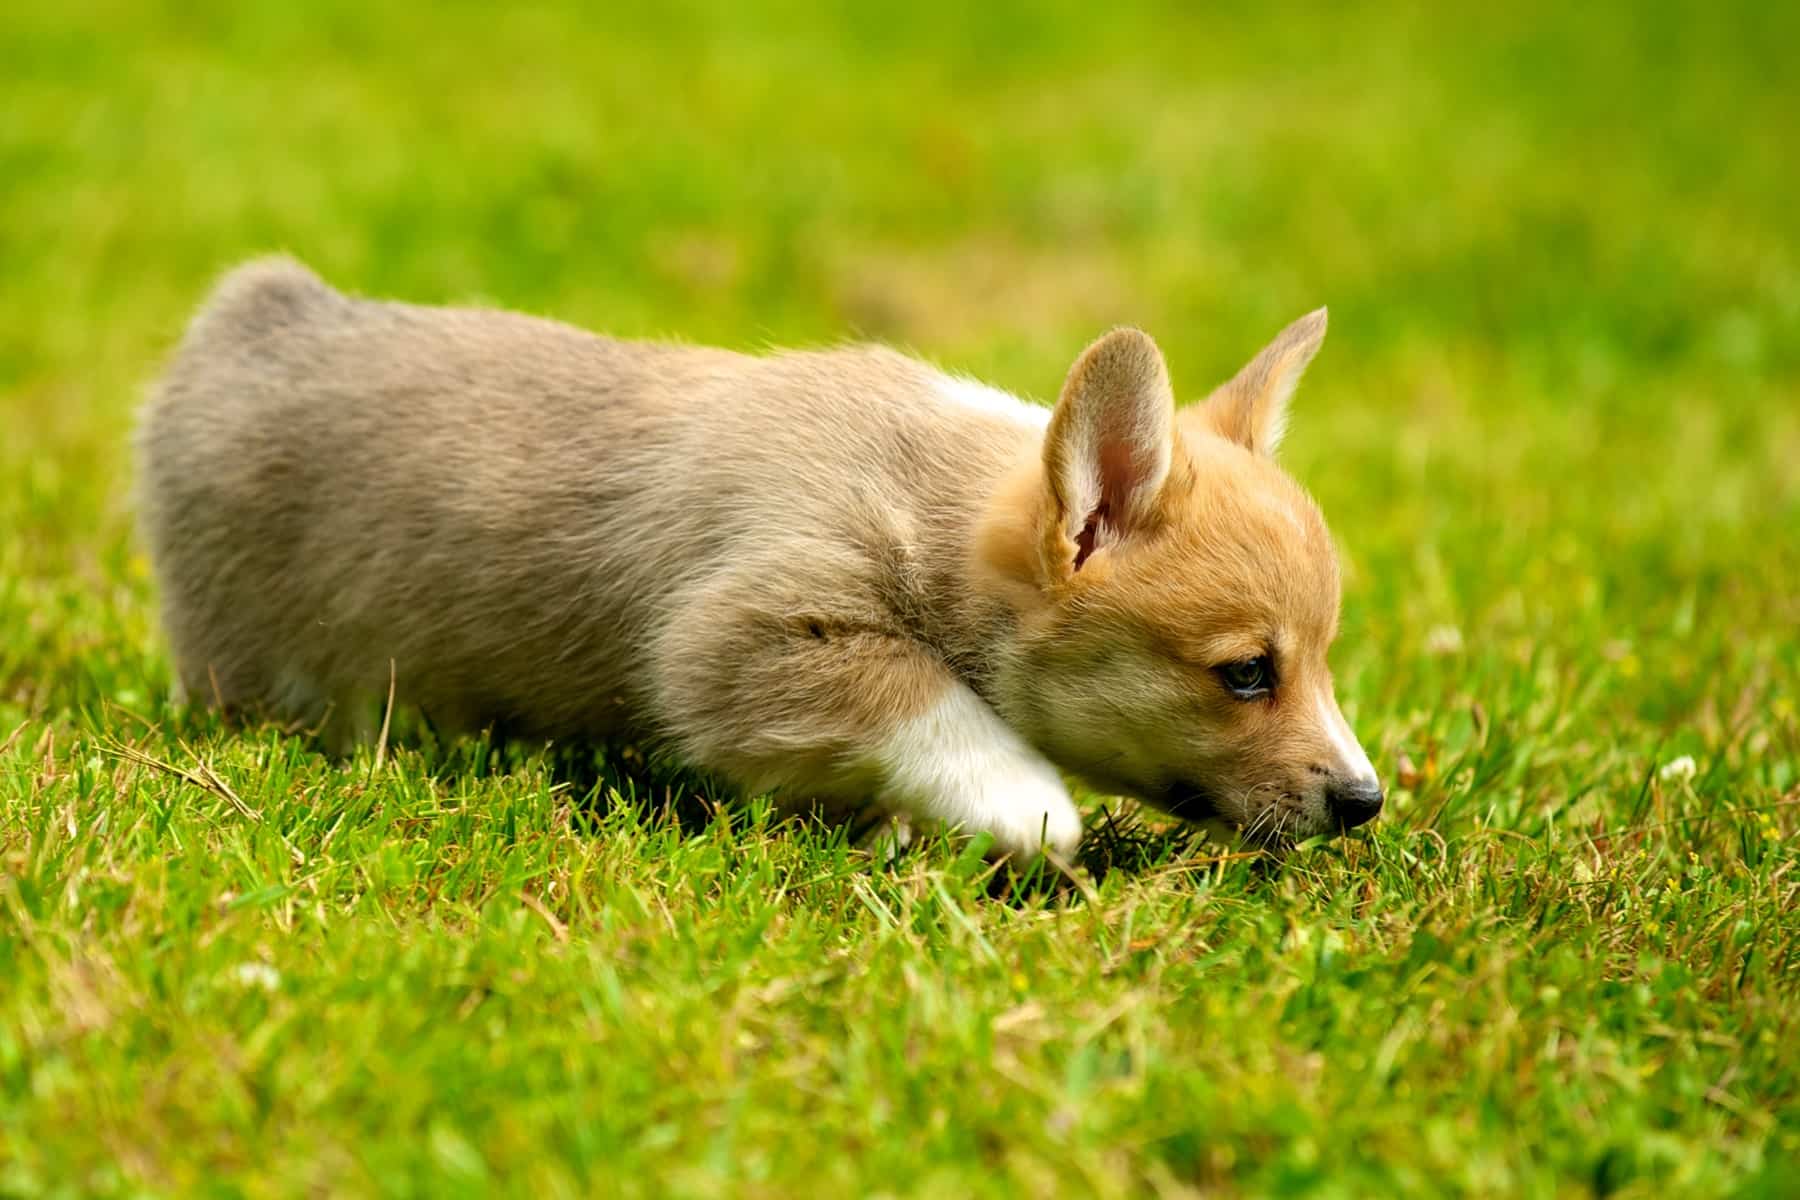 Do Corgis Have Tails? This cute corgi has a tiny tail and is hanging out in the green grass.